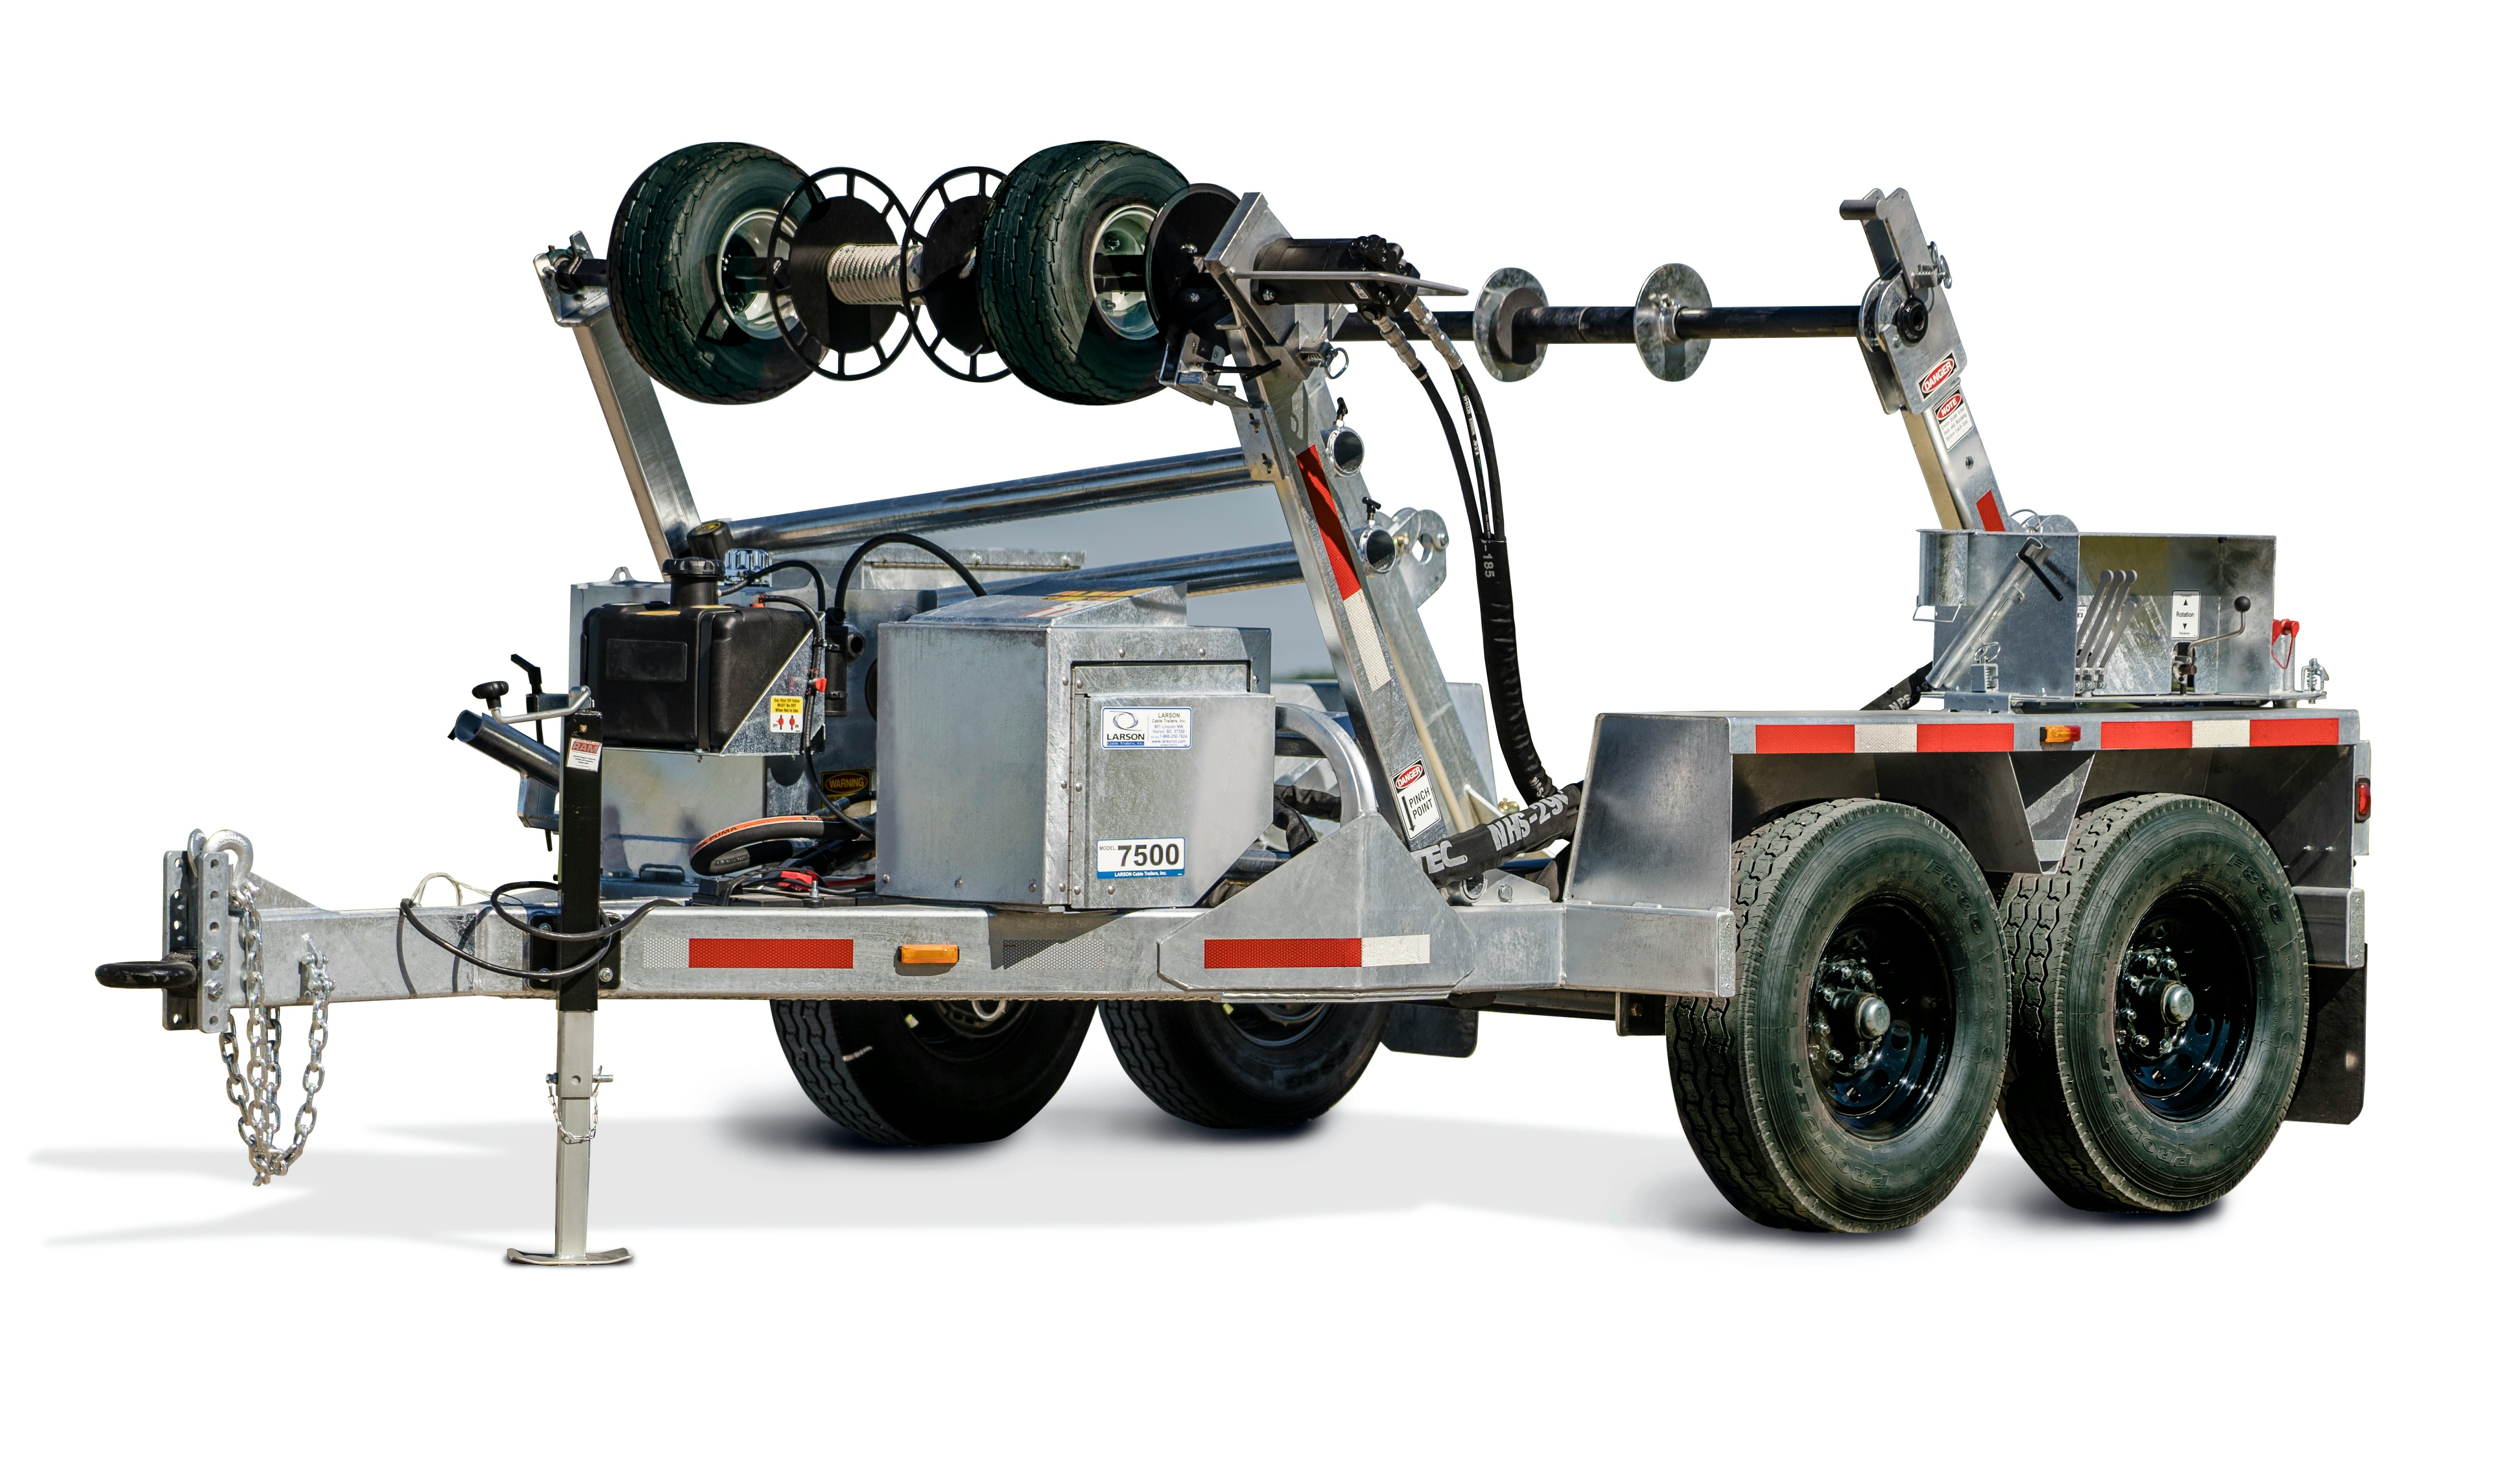 Felling Trailers Expands Offerings with Larson Cable Trailers Products  From: Felling Trailers, Inc.